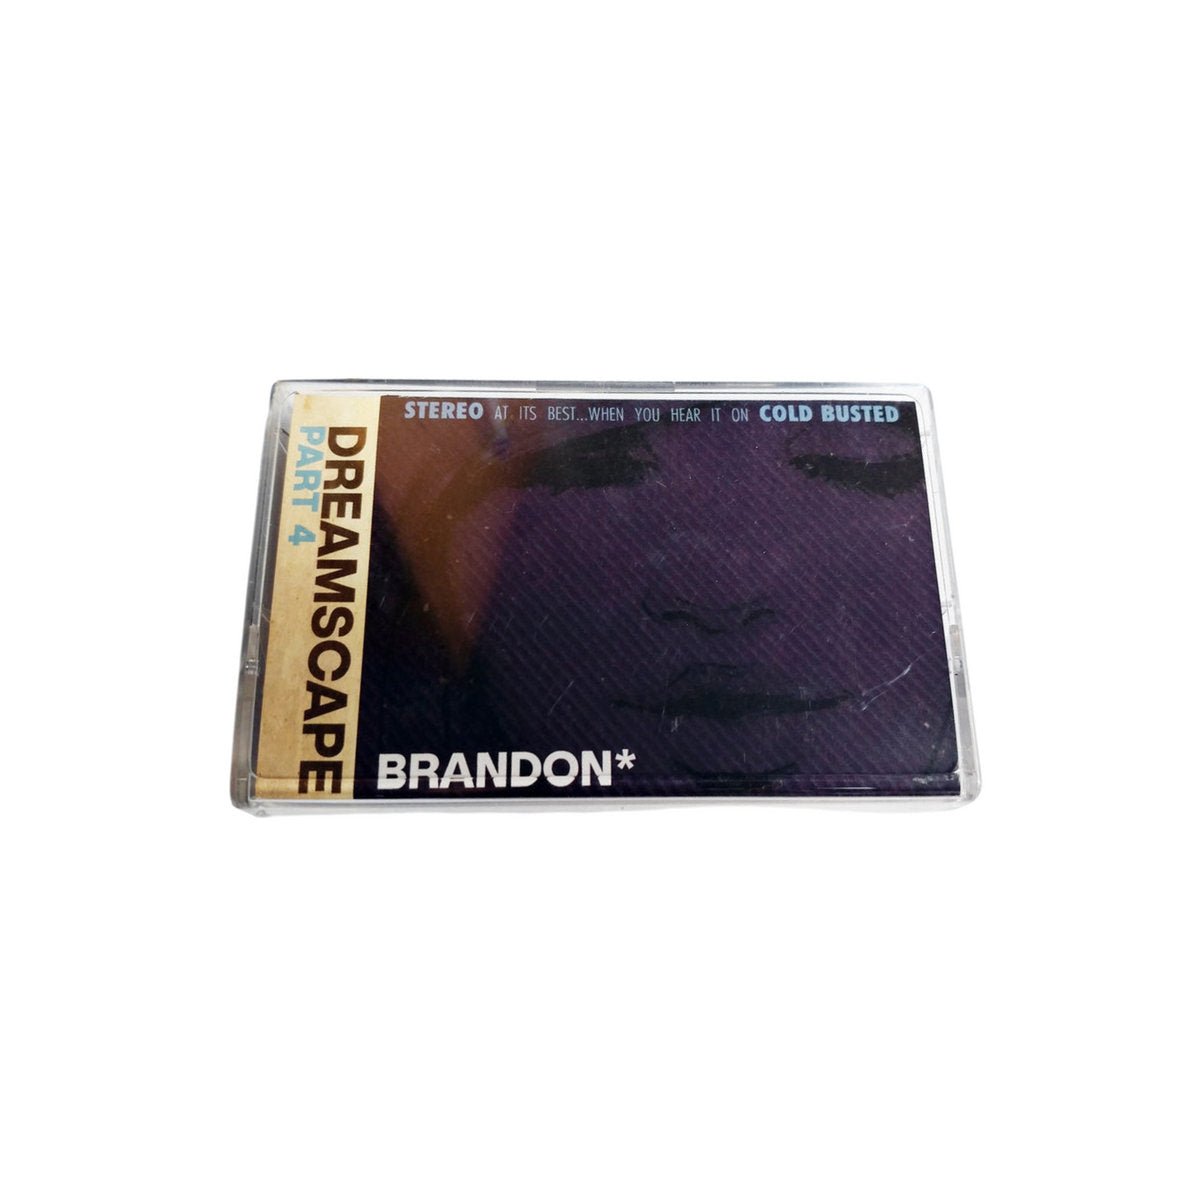 Brandon* - Dreamscape: Part 4 - Limited Edition Cassette (2nd Pressing) - Cold Busted